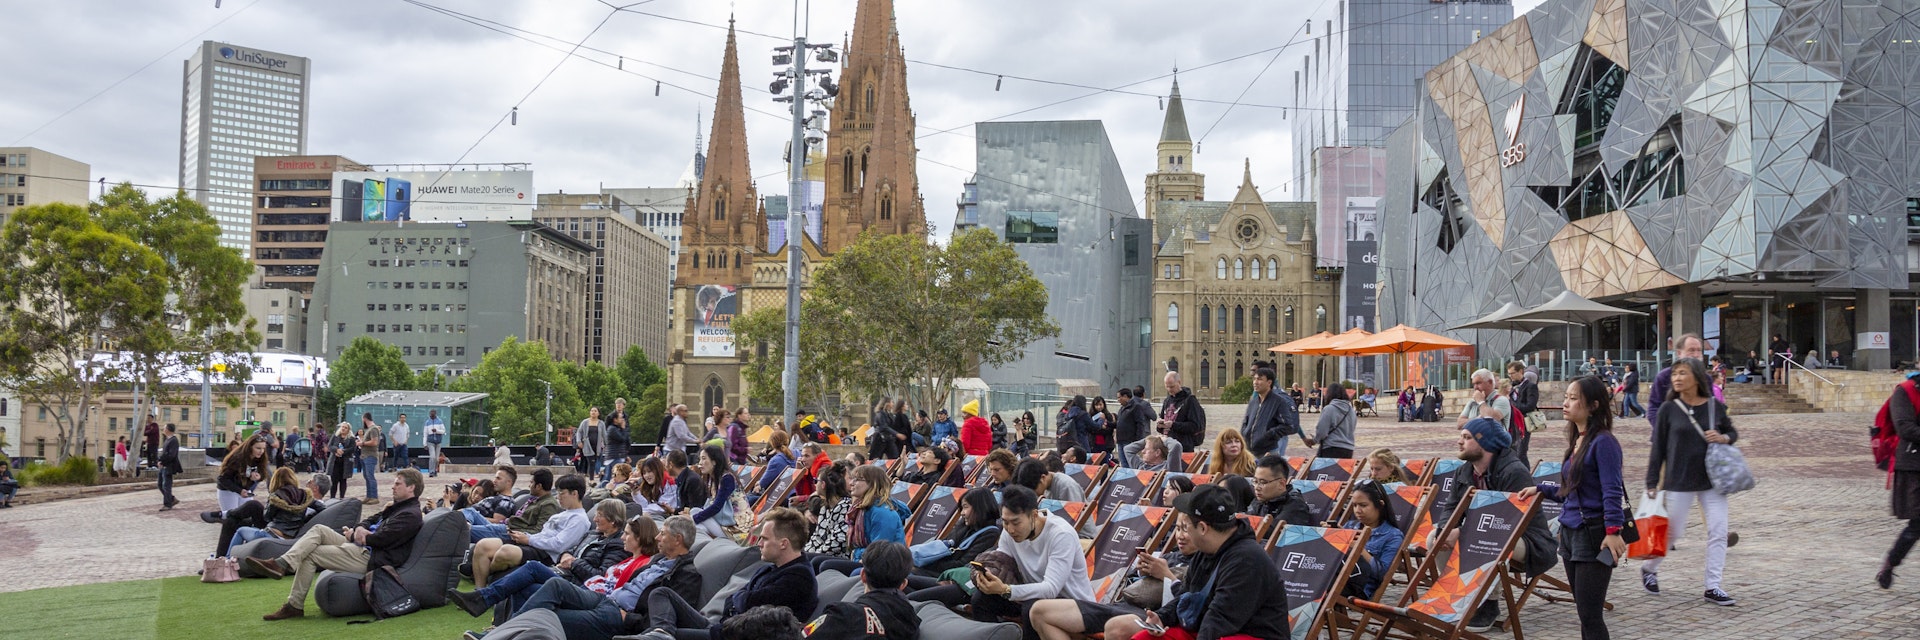 Australia, Melbourne - September 2018 - People sitting on beanbags and chairs in front of main stage at Federation Square